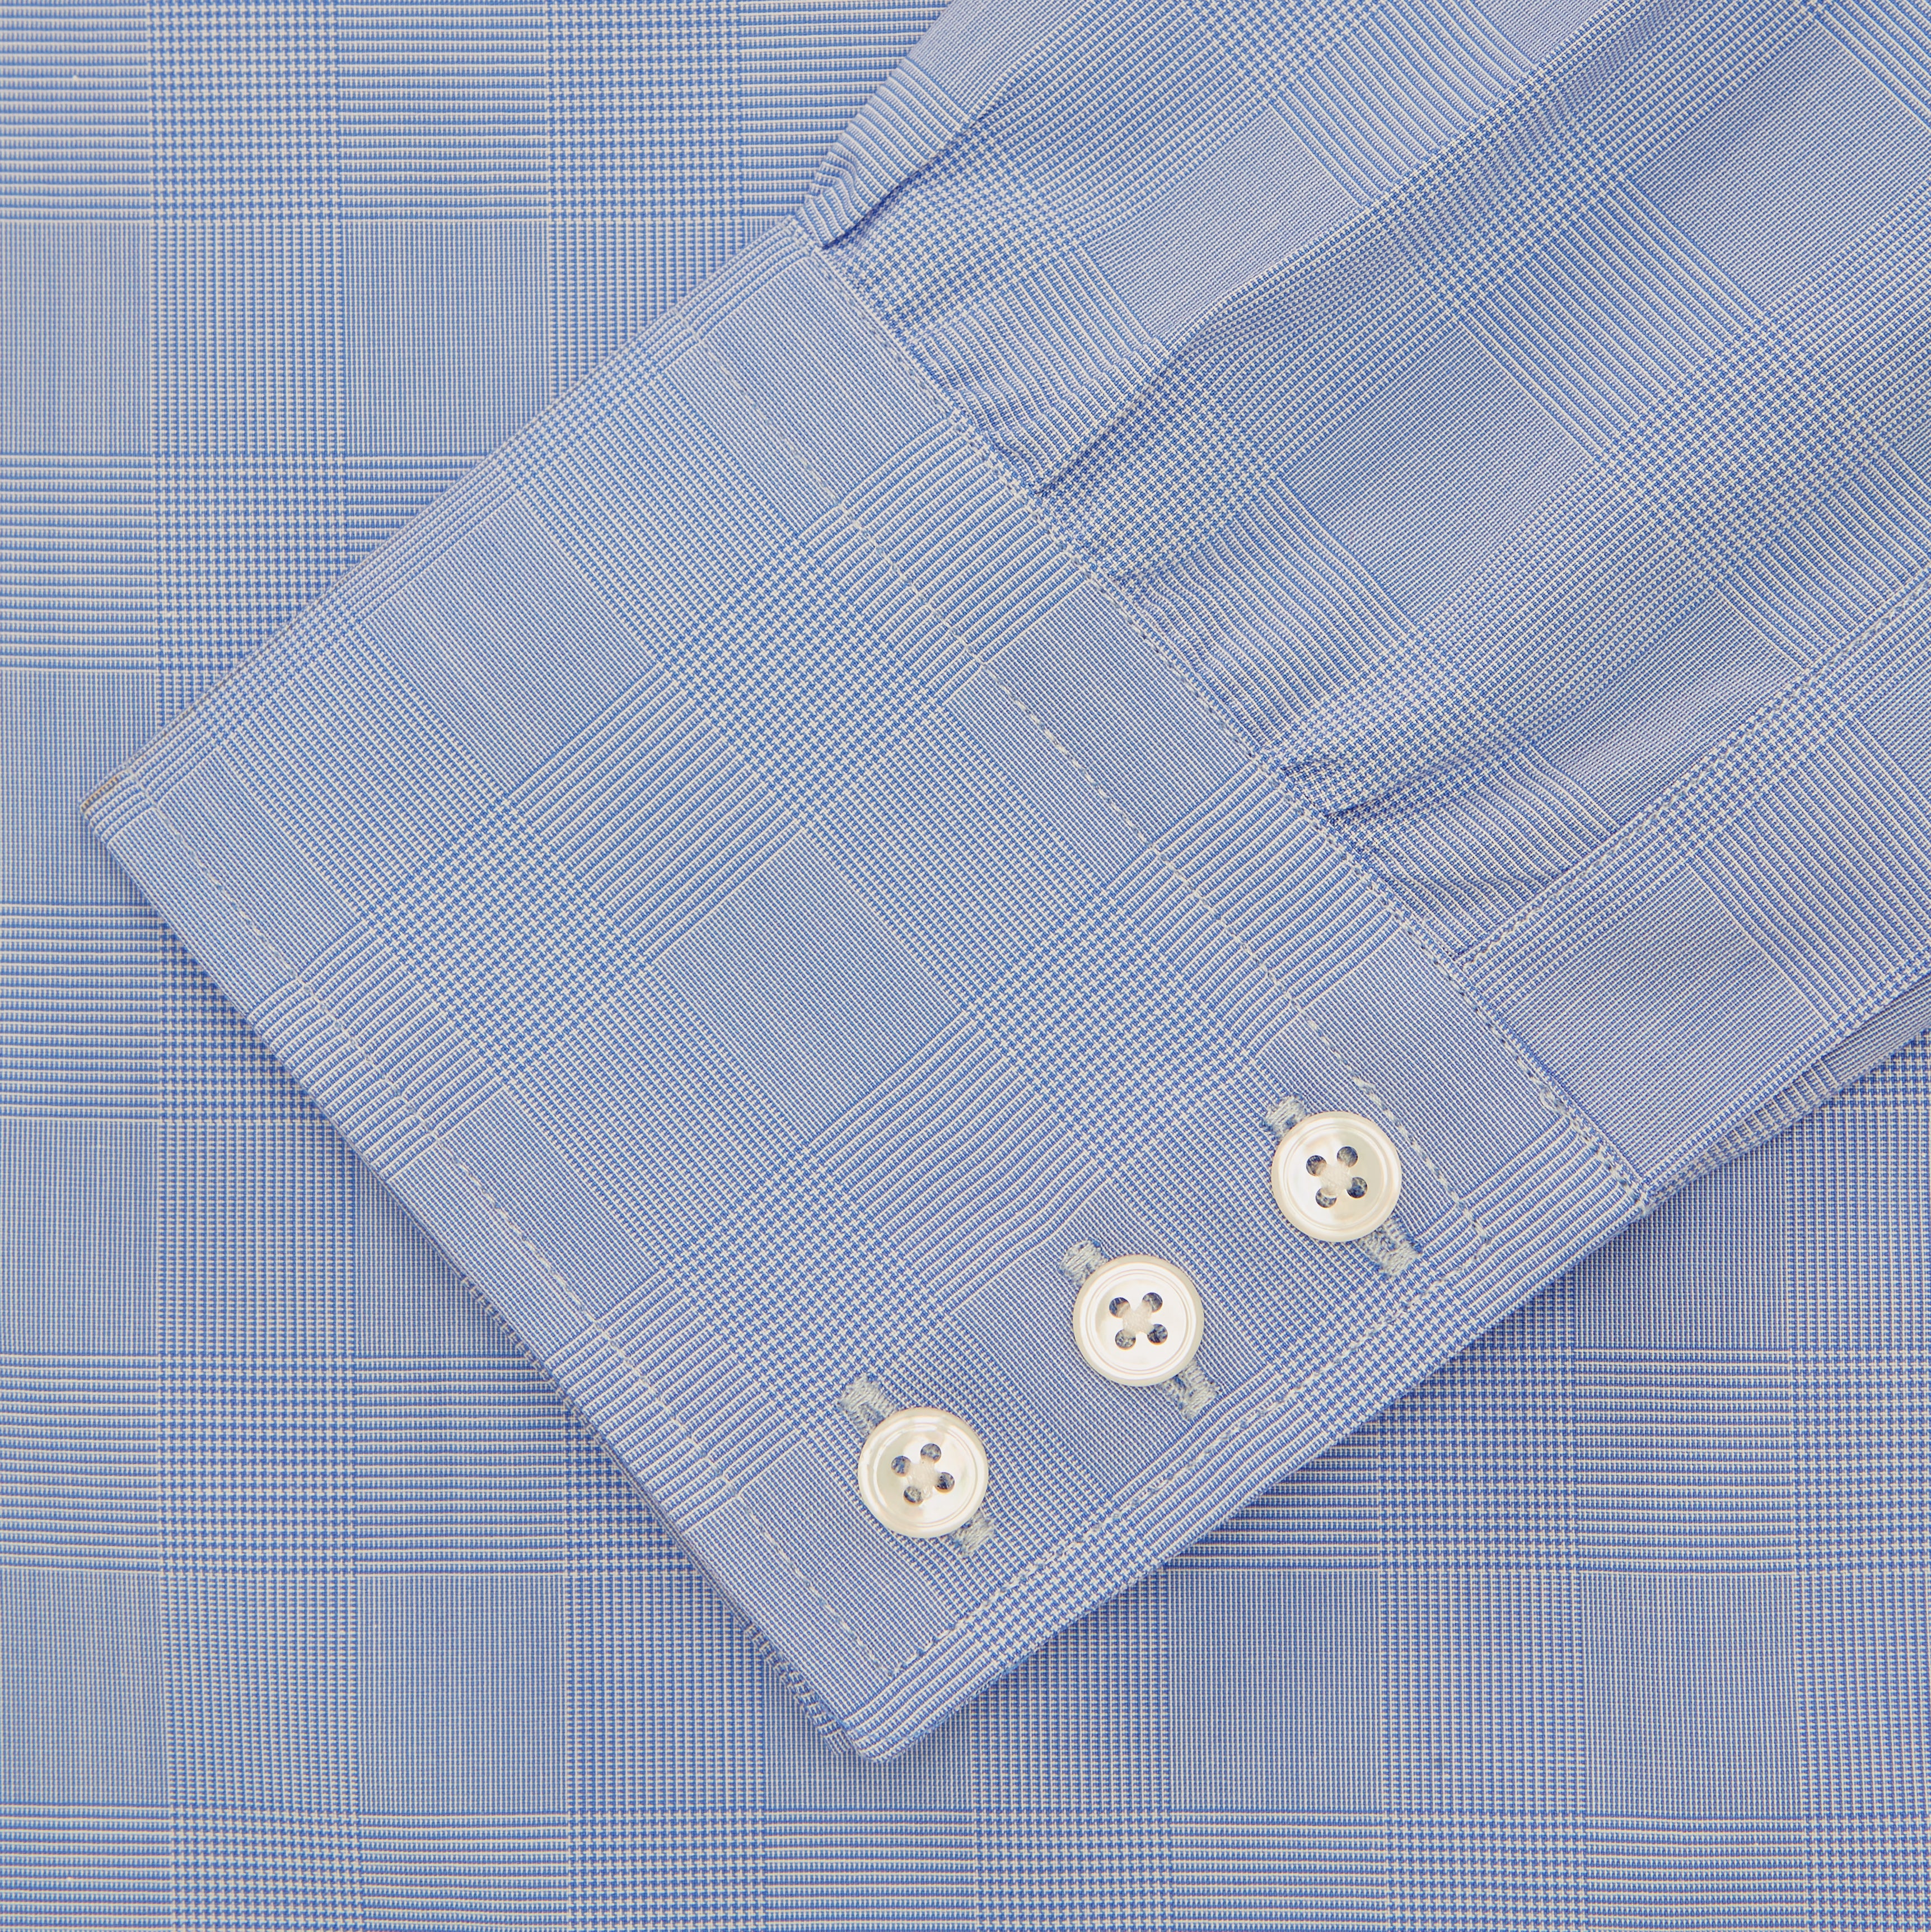 Blue Prince of Wales Check Shirt with Regent Collar and Button Cuffs